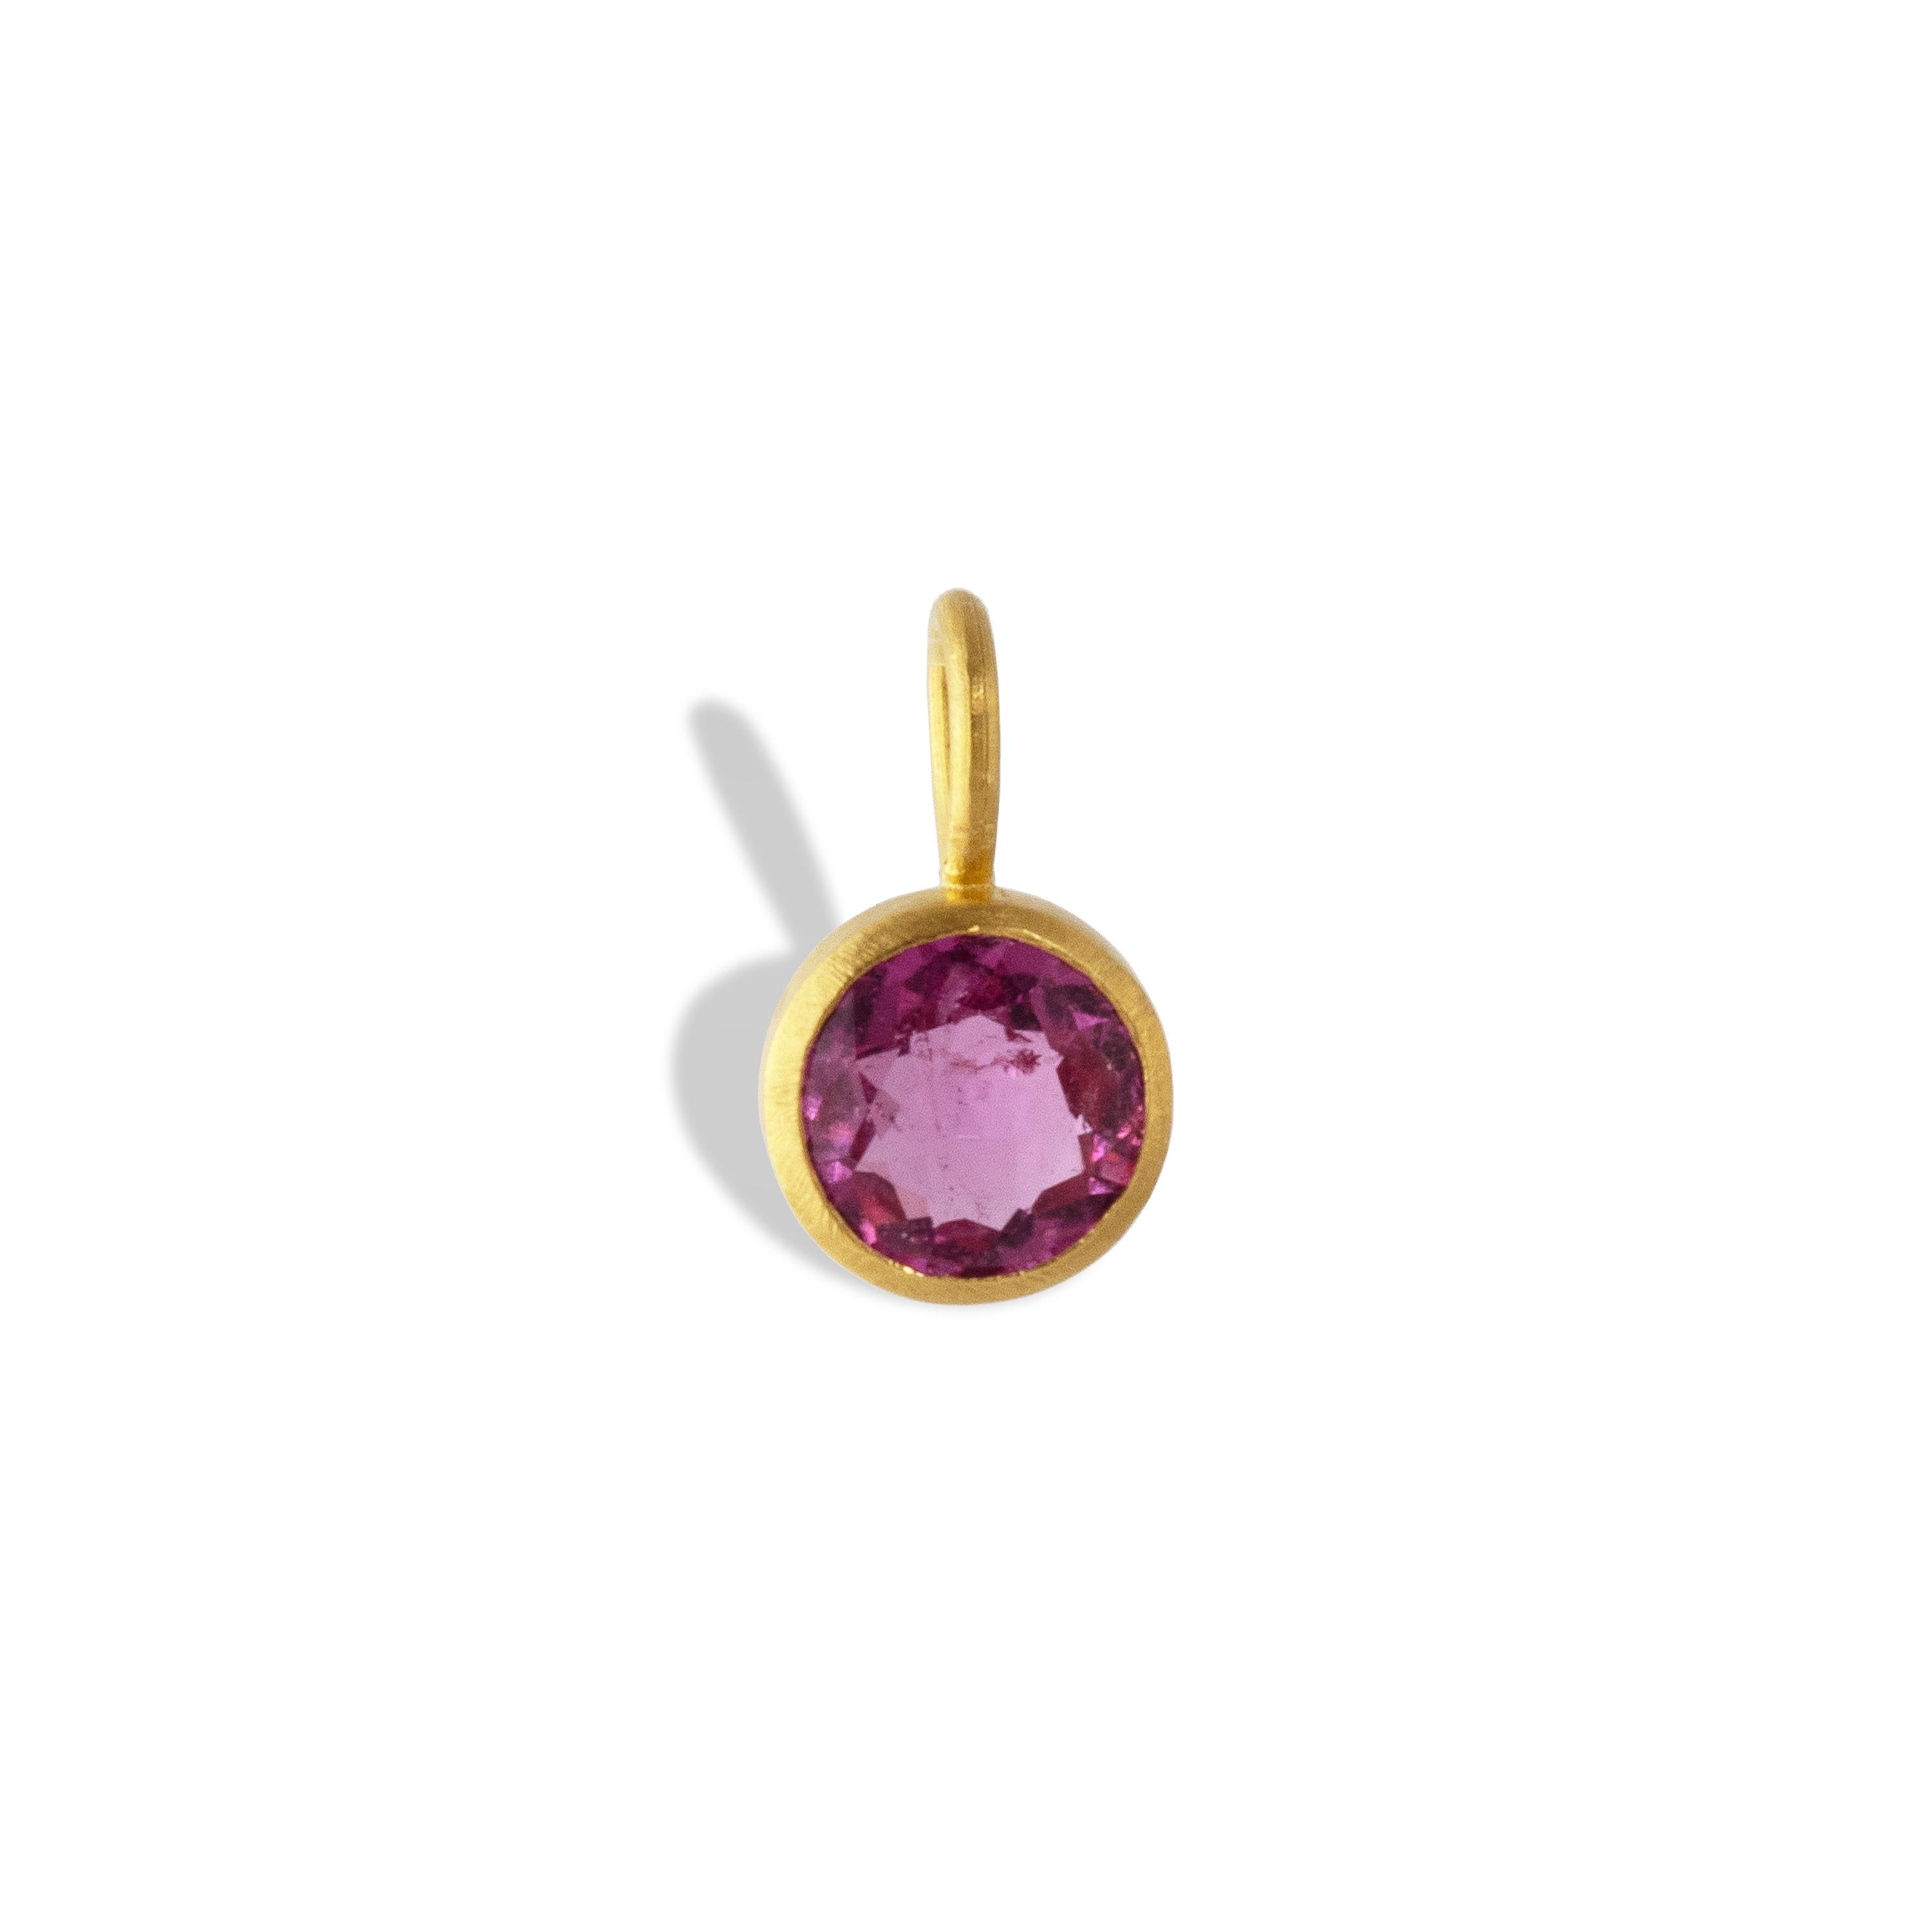 A deep pink rubellite tourmaline is set in 22k yellow gold.  This delicate pendant is 12.44mm long x 7mm wide and 5mm deep.

 Pink tourmaline represents a love of humanity and humanitarianism. It is worn to promote sympathy towards others.  It is